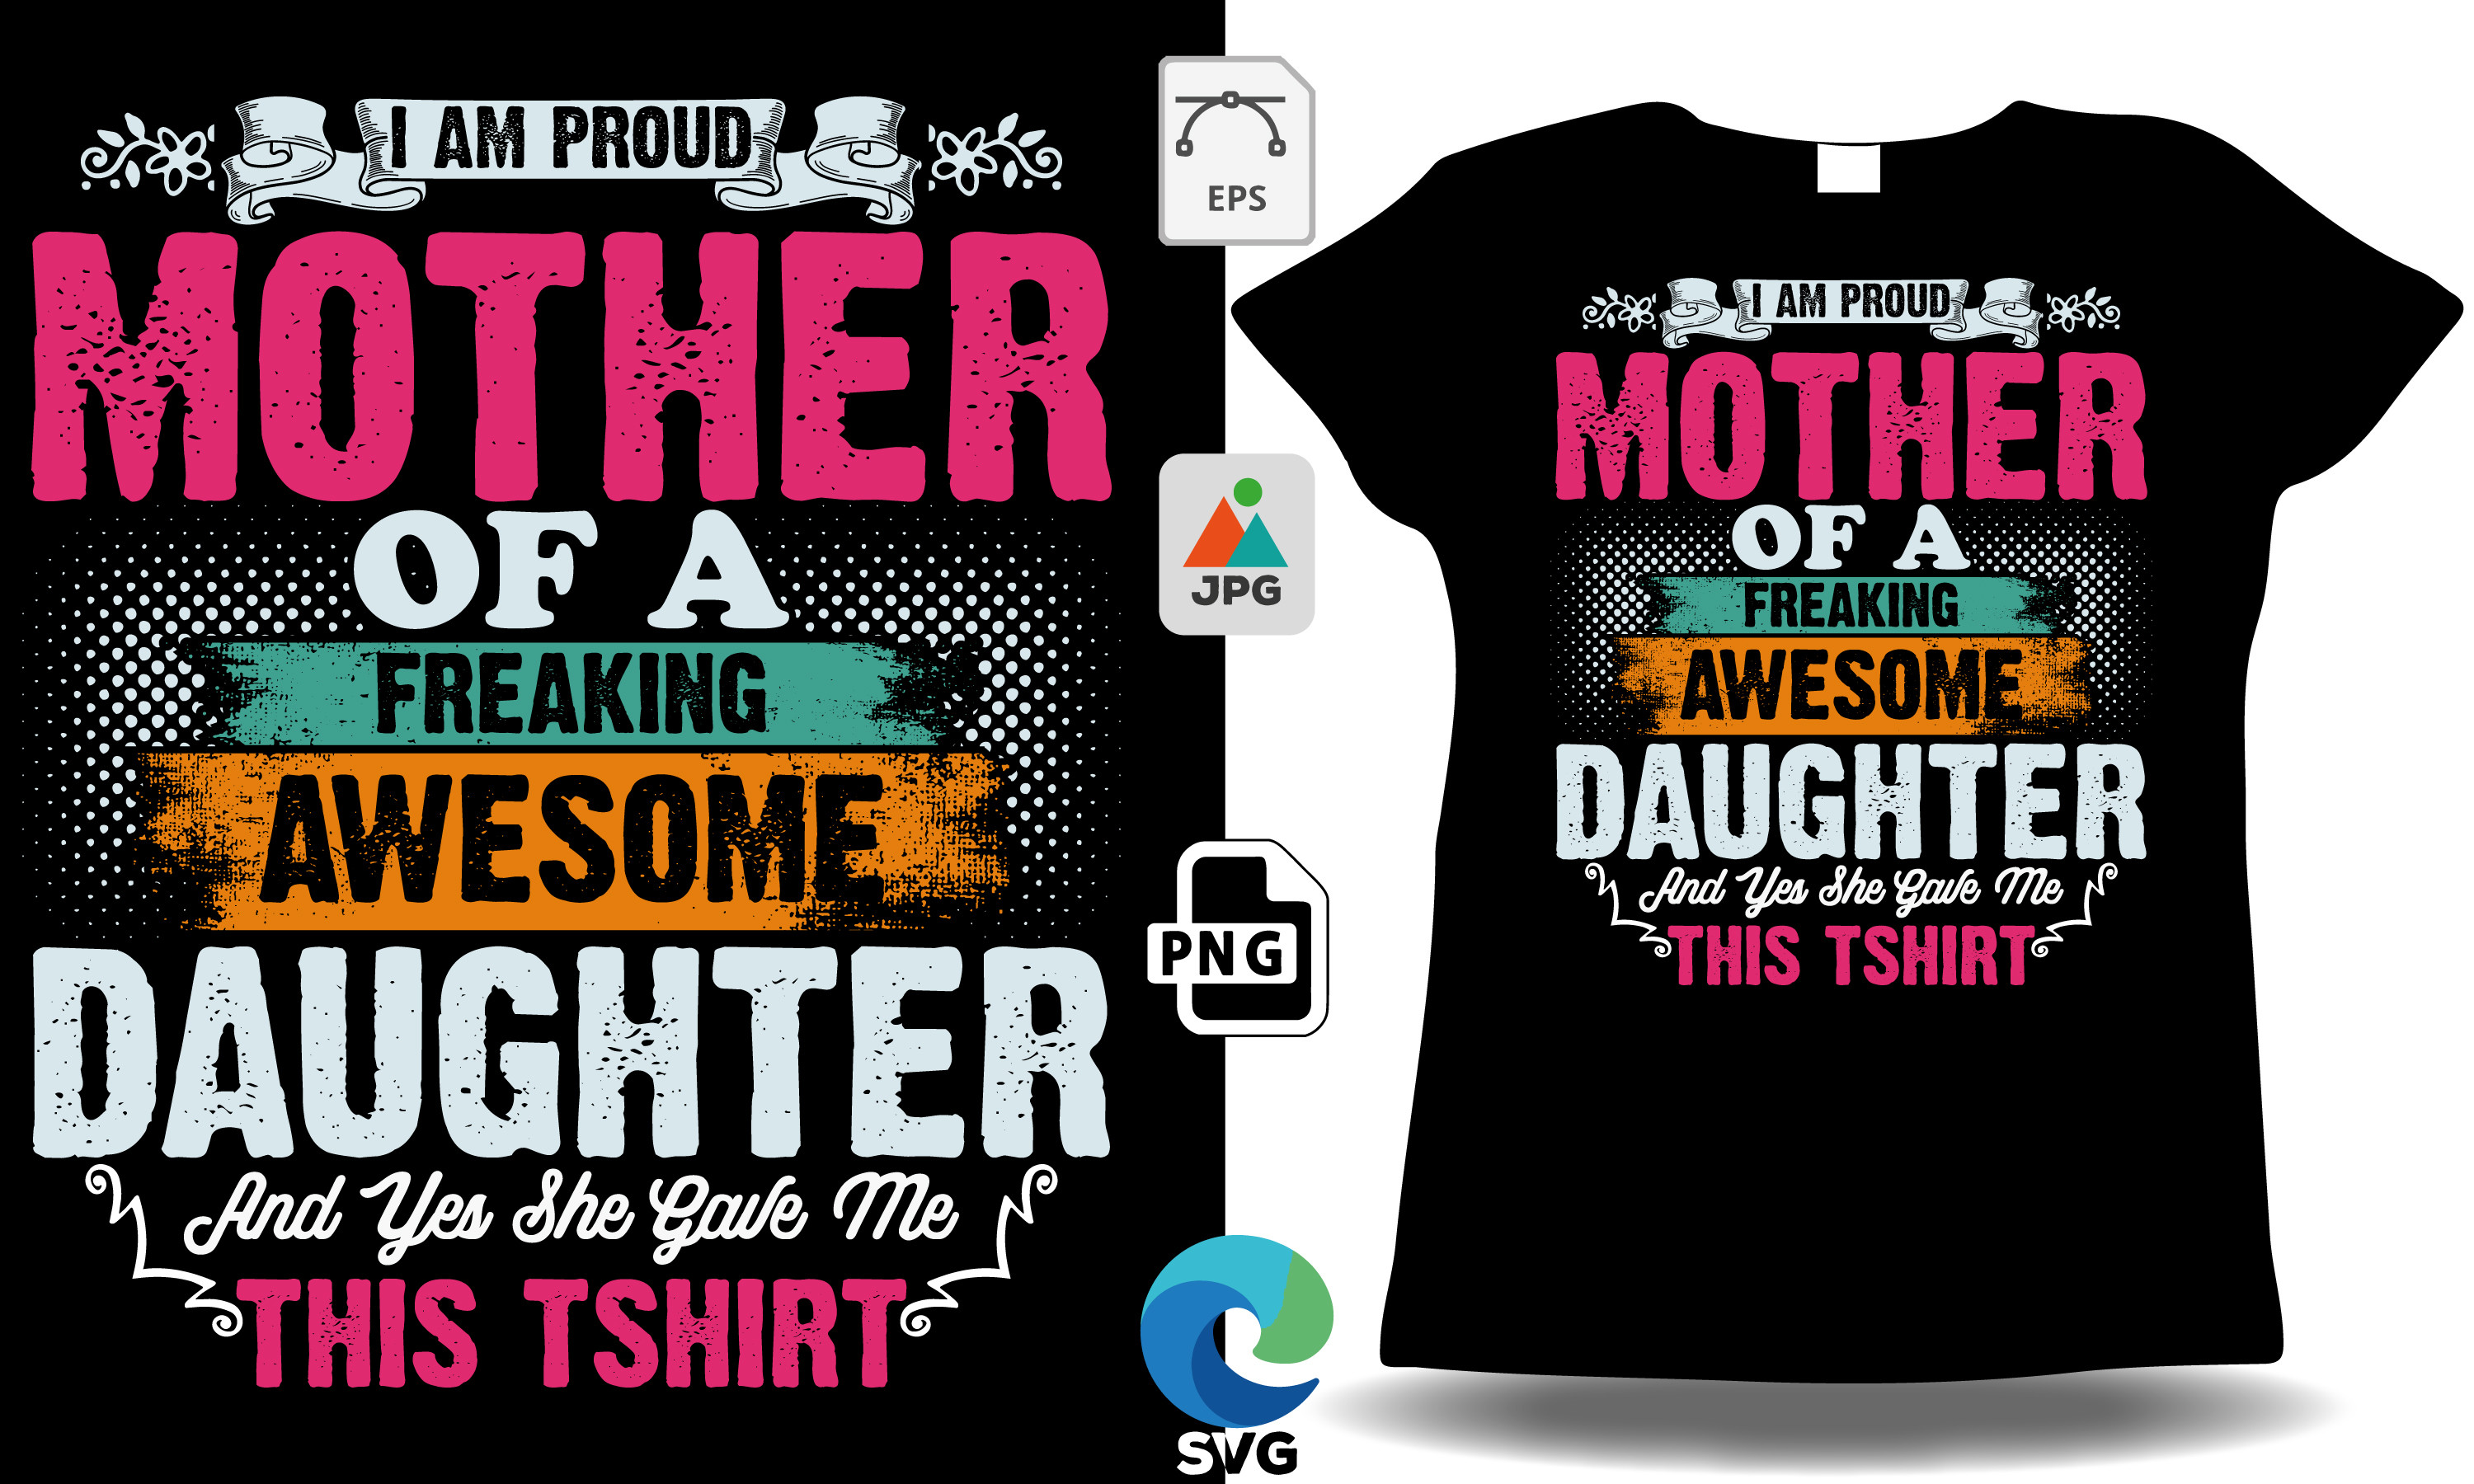 I'm Proud Mother of a Freaking Daughter Graphic by Grand Mark ...